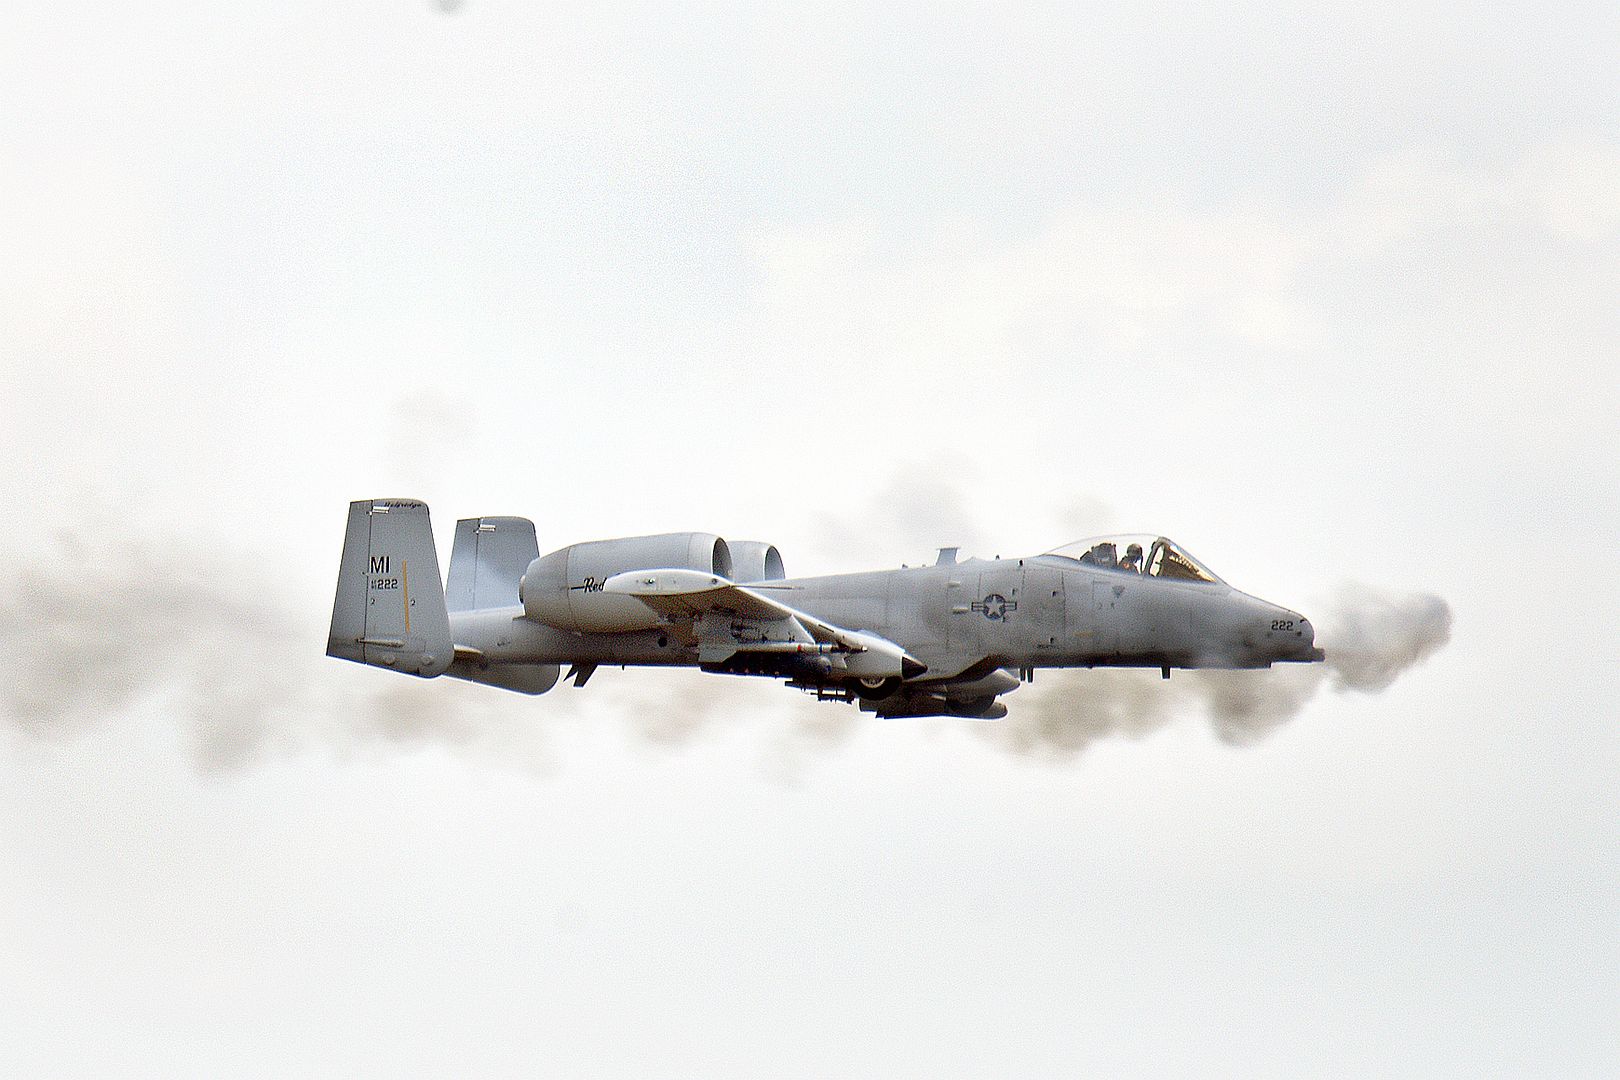 10 Thunderbolt II Aircraft From The 107th Fighter Wing Selfridge Air National Guard Base Michigan Perform Live Fire Exercises